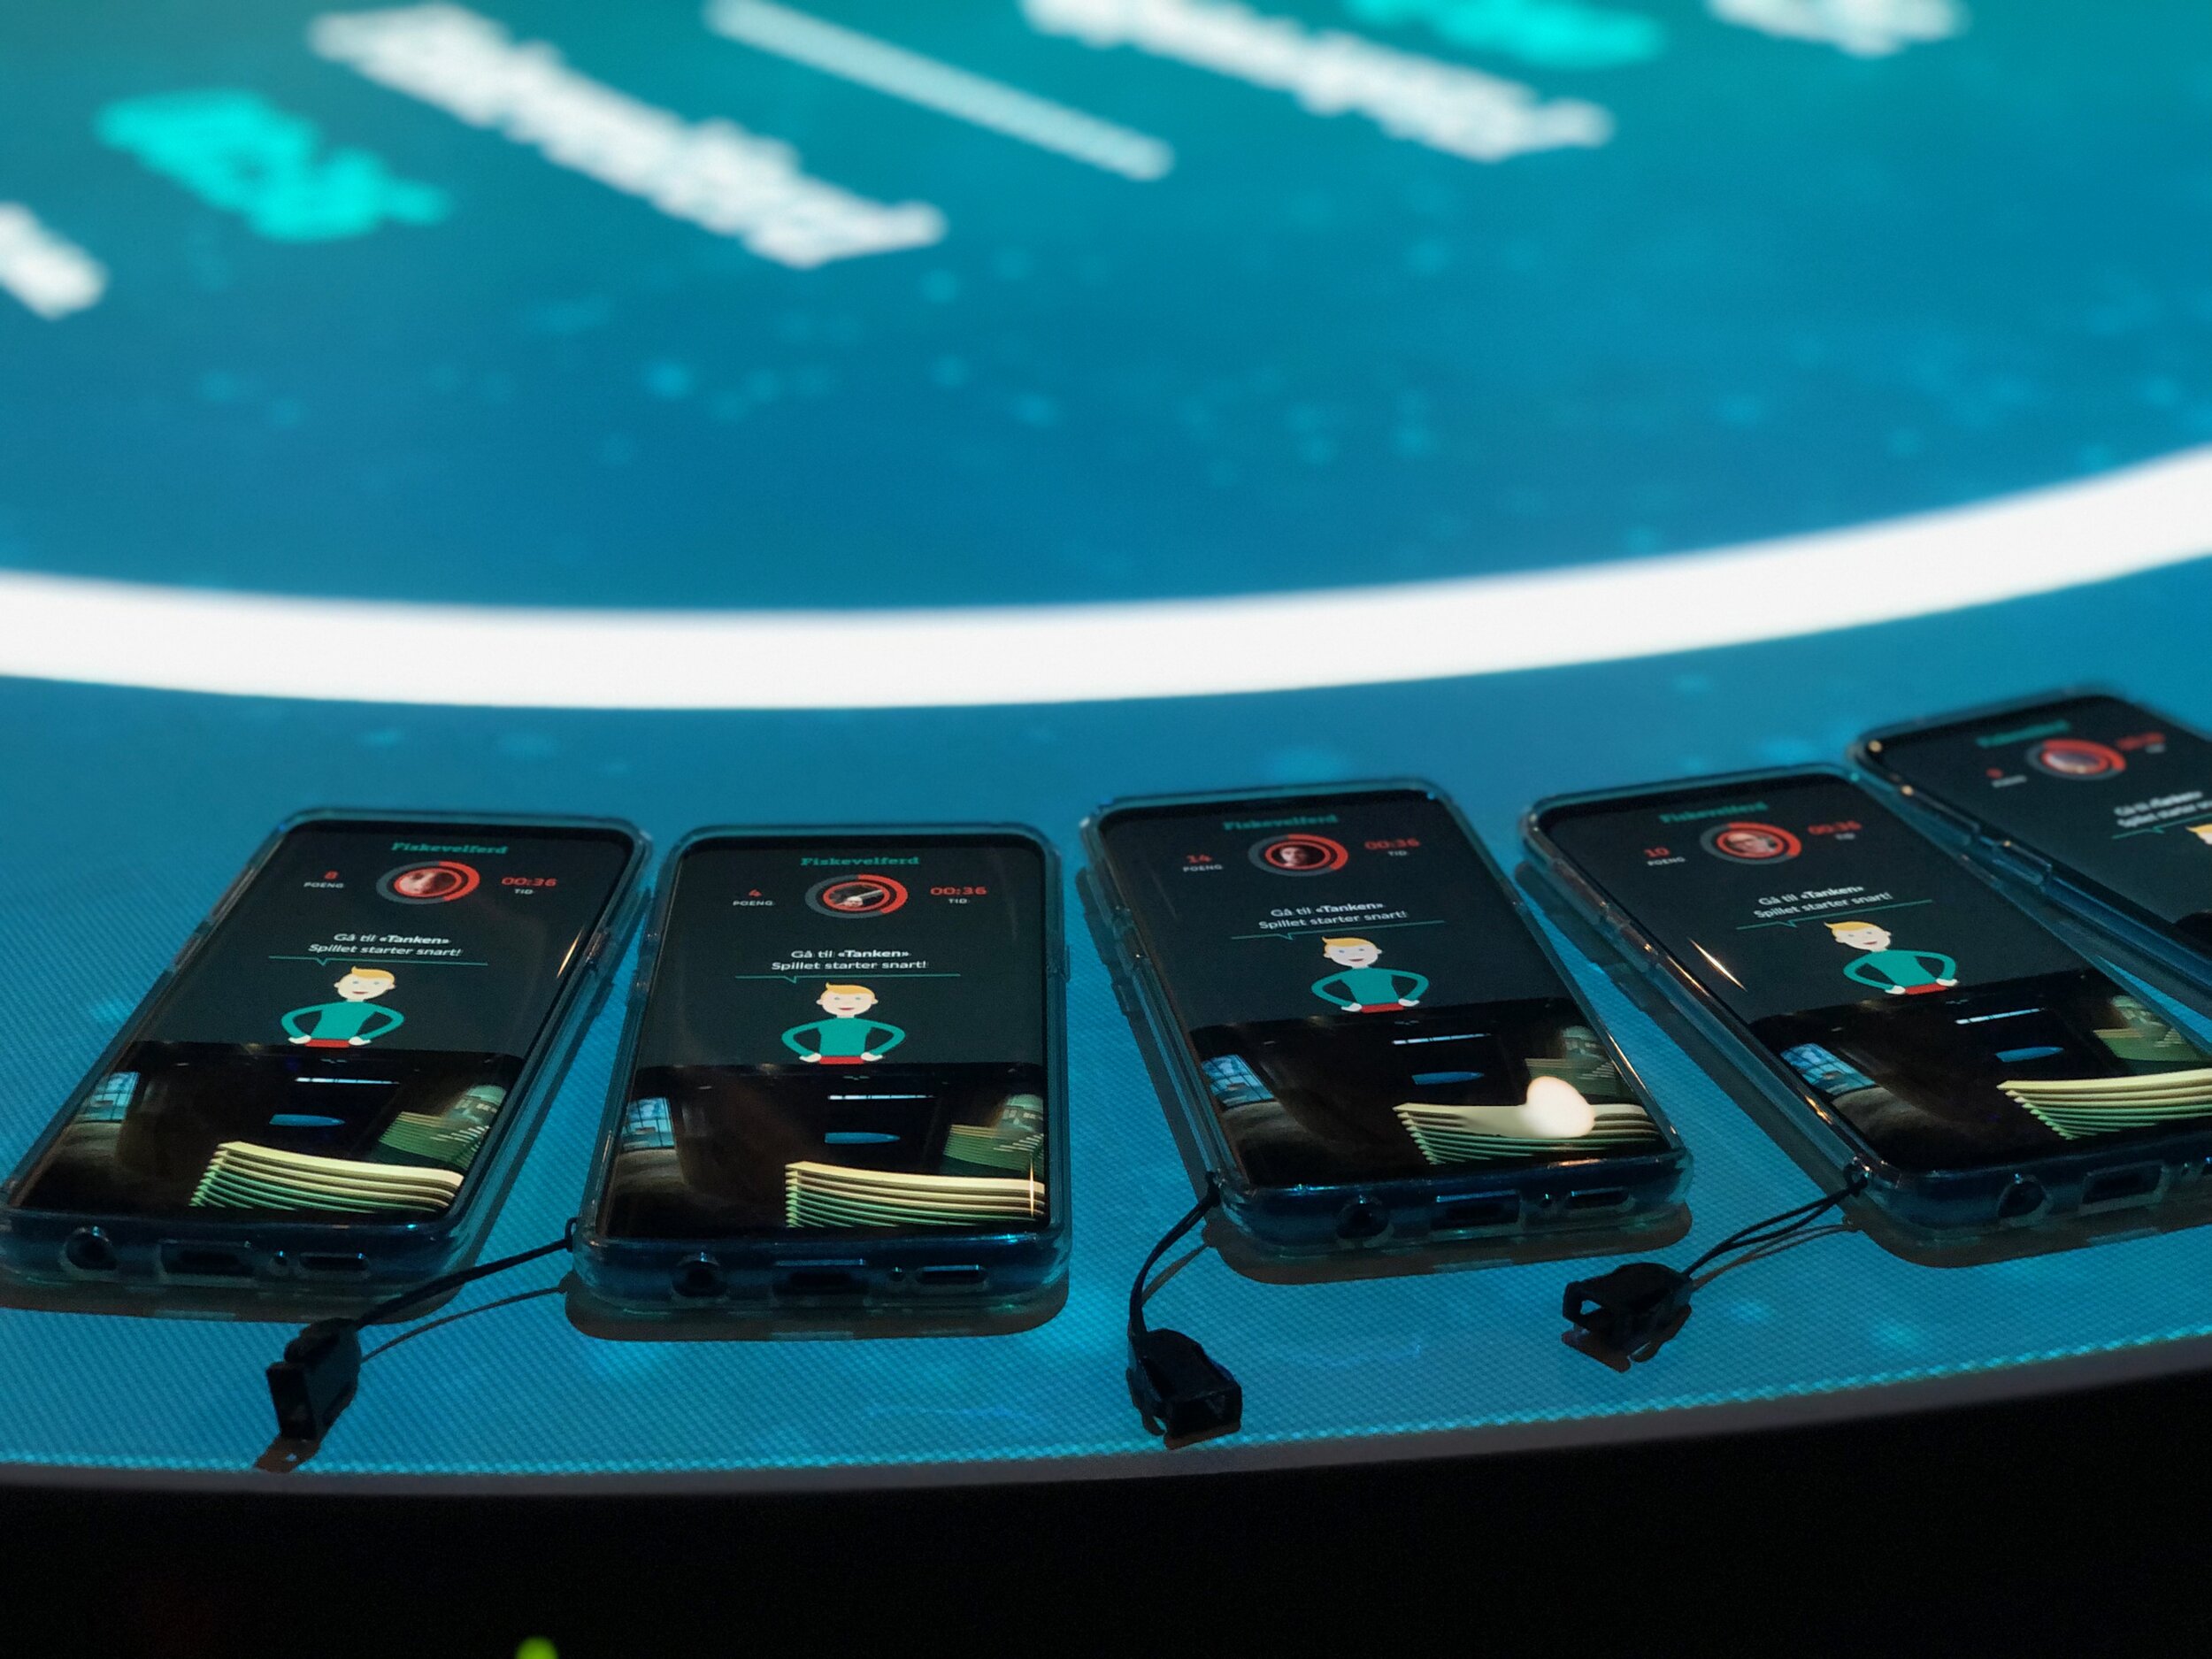 Several phones lying on a screen with a countdown and questions on them.